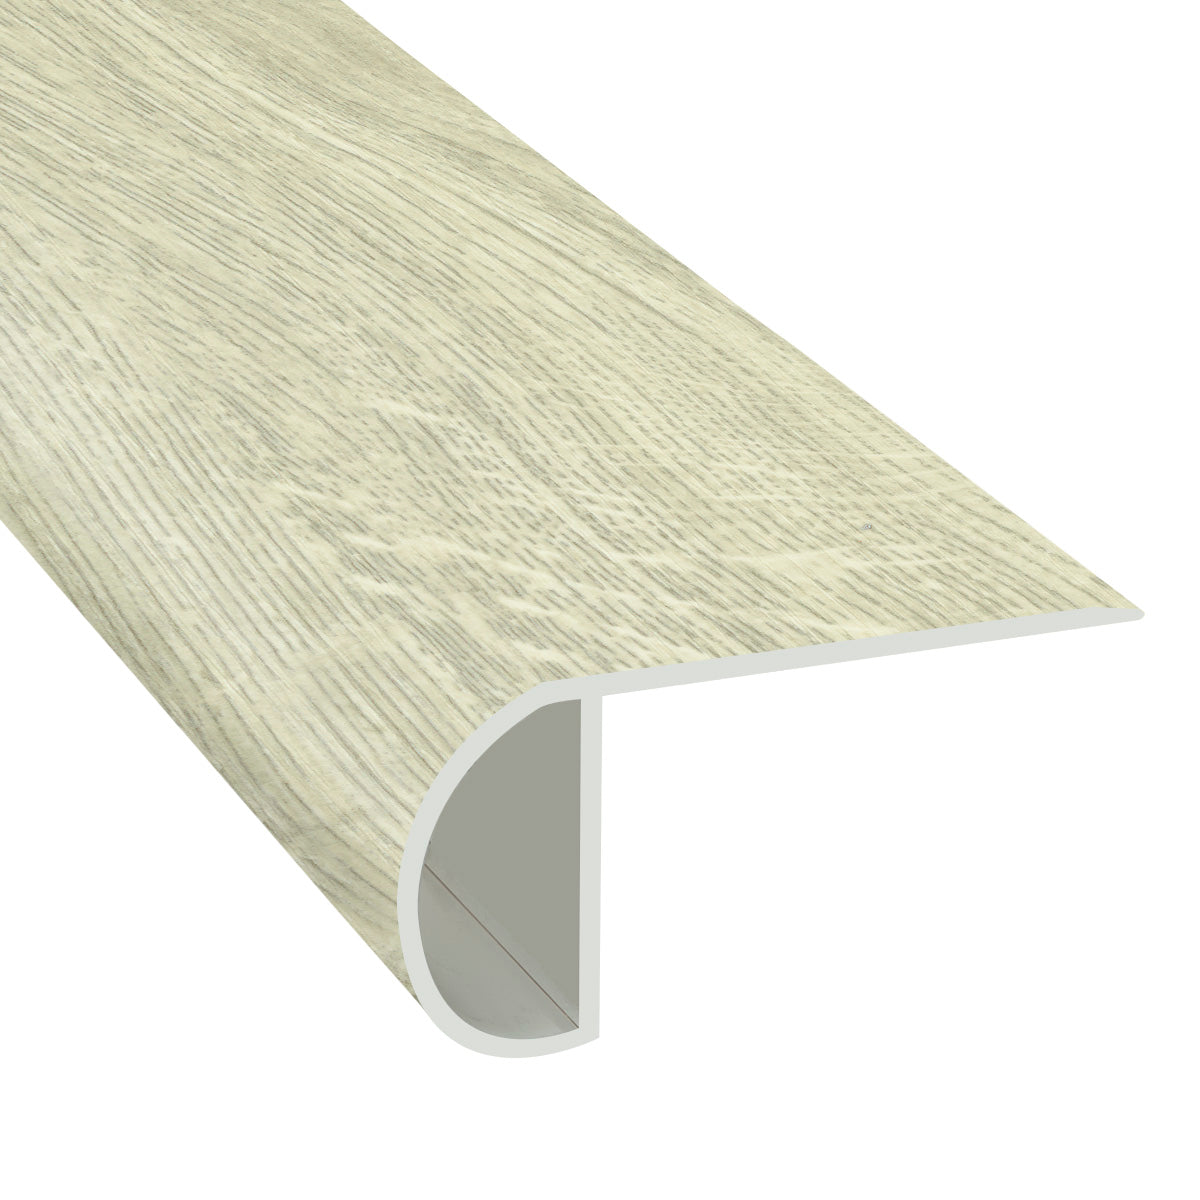 Tahitian Sand 1.03 in. Thick x 2.23 in. Width x 94 in. Length Vinyl Overlap Stair Nose Molding